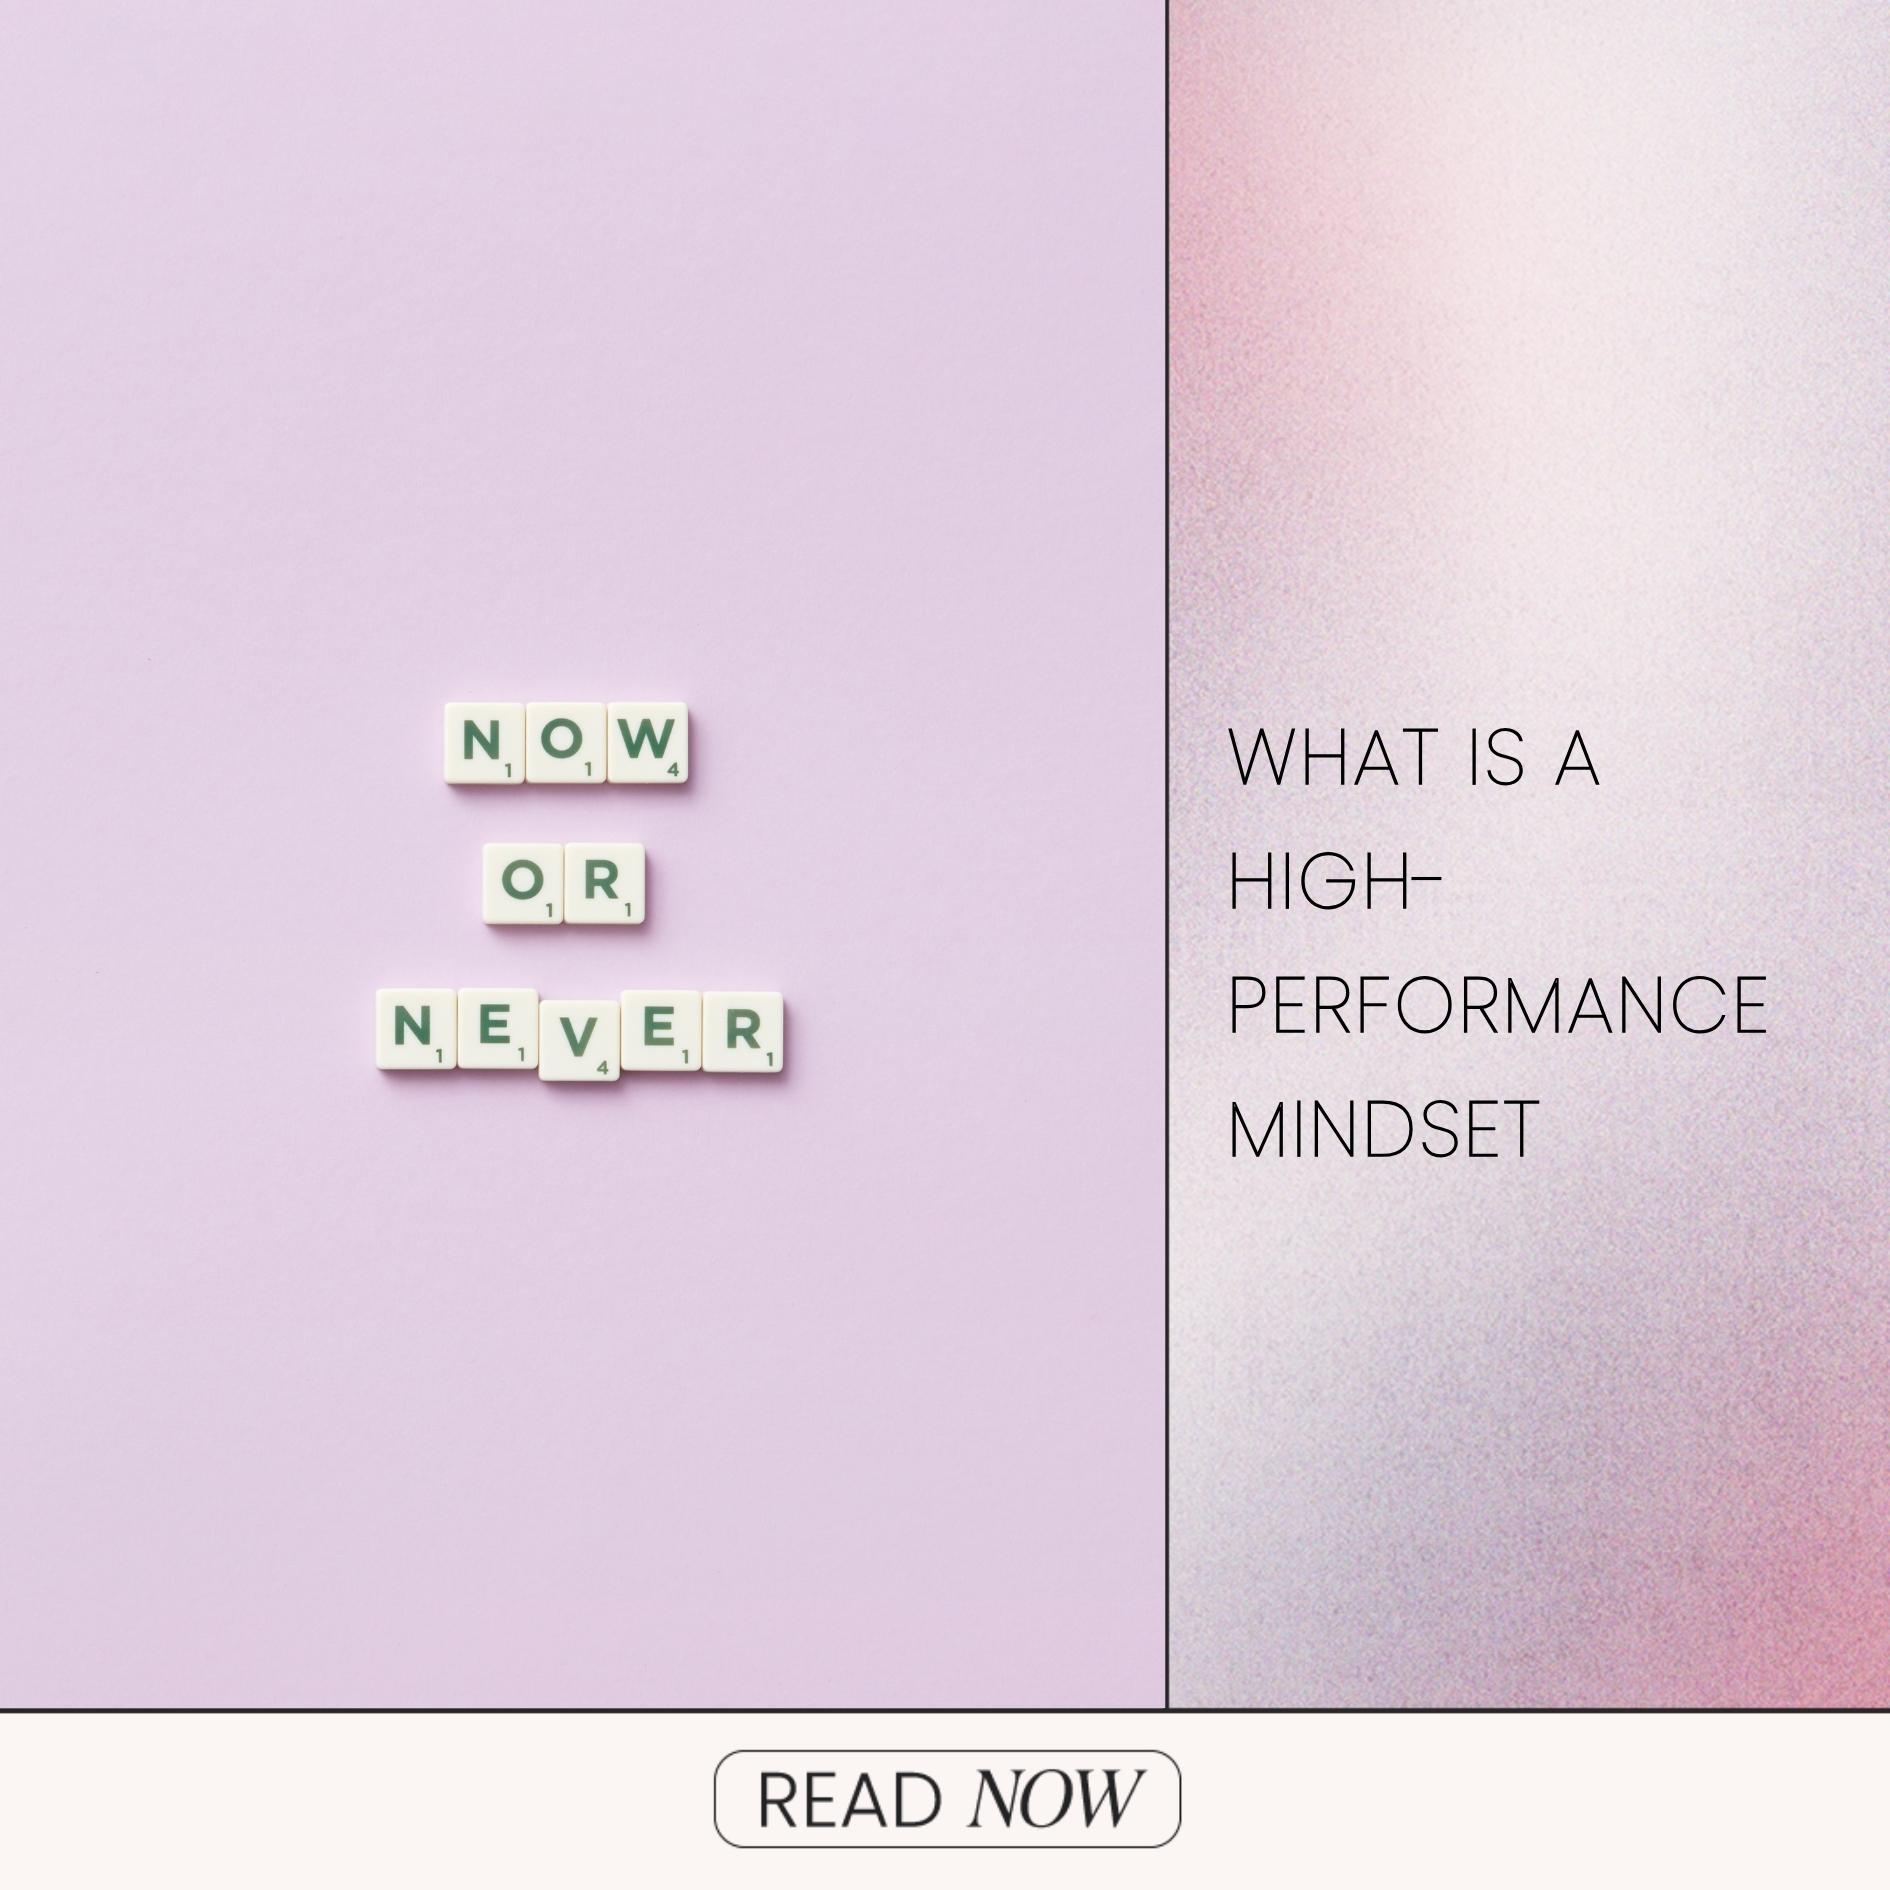 What is a High-Performance Mindset?